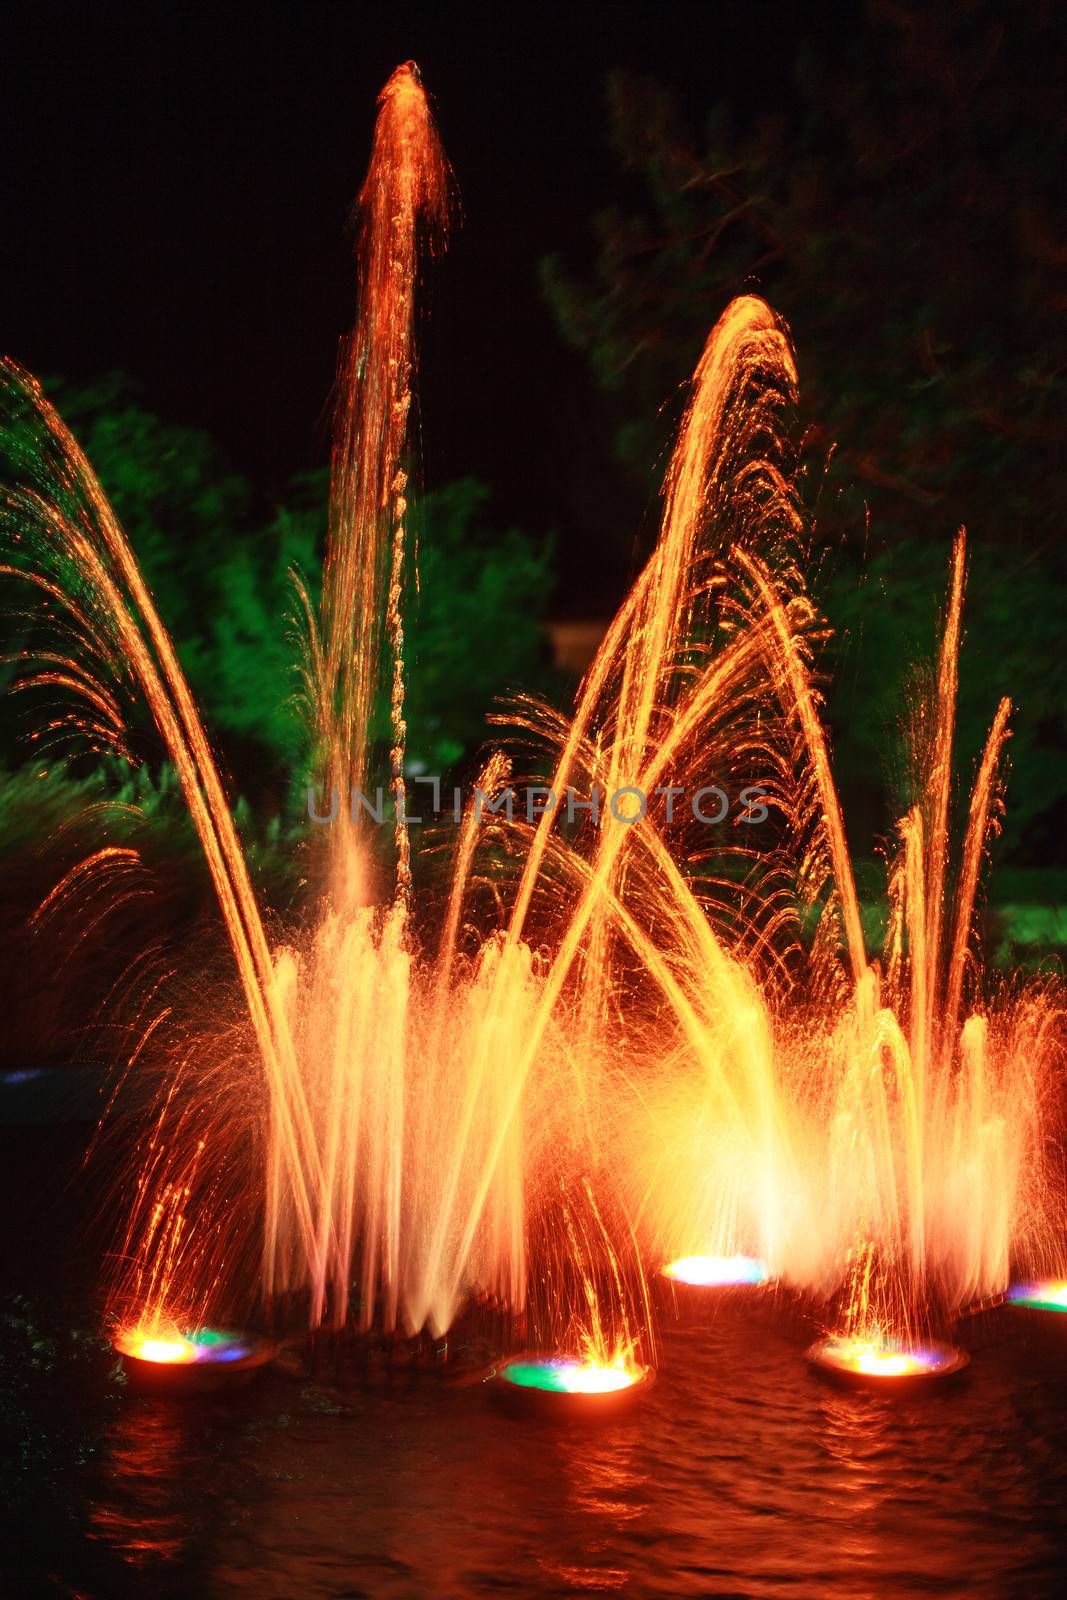 Fireworks display on a lake by STphotography